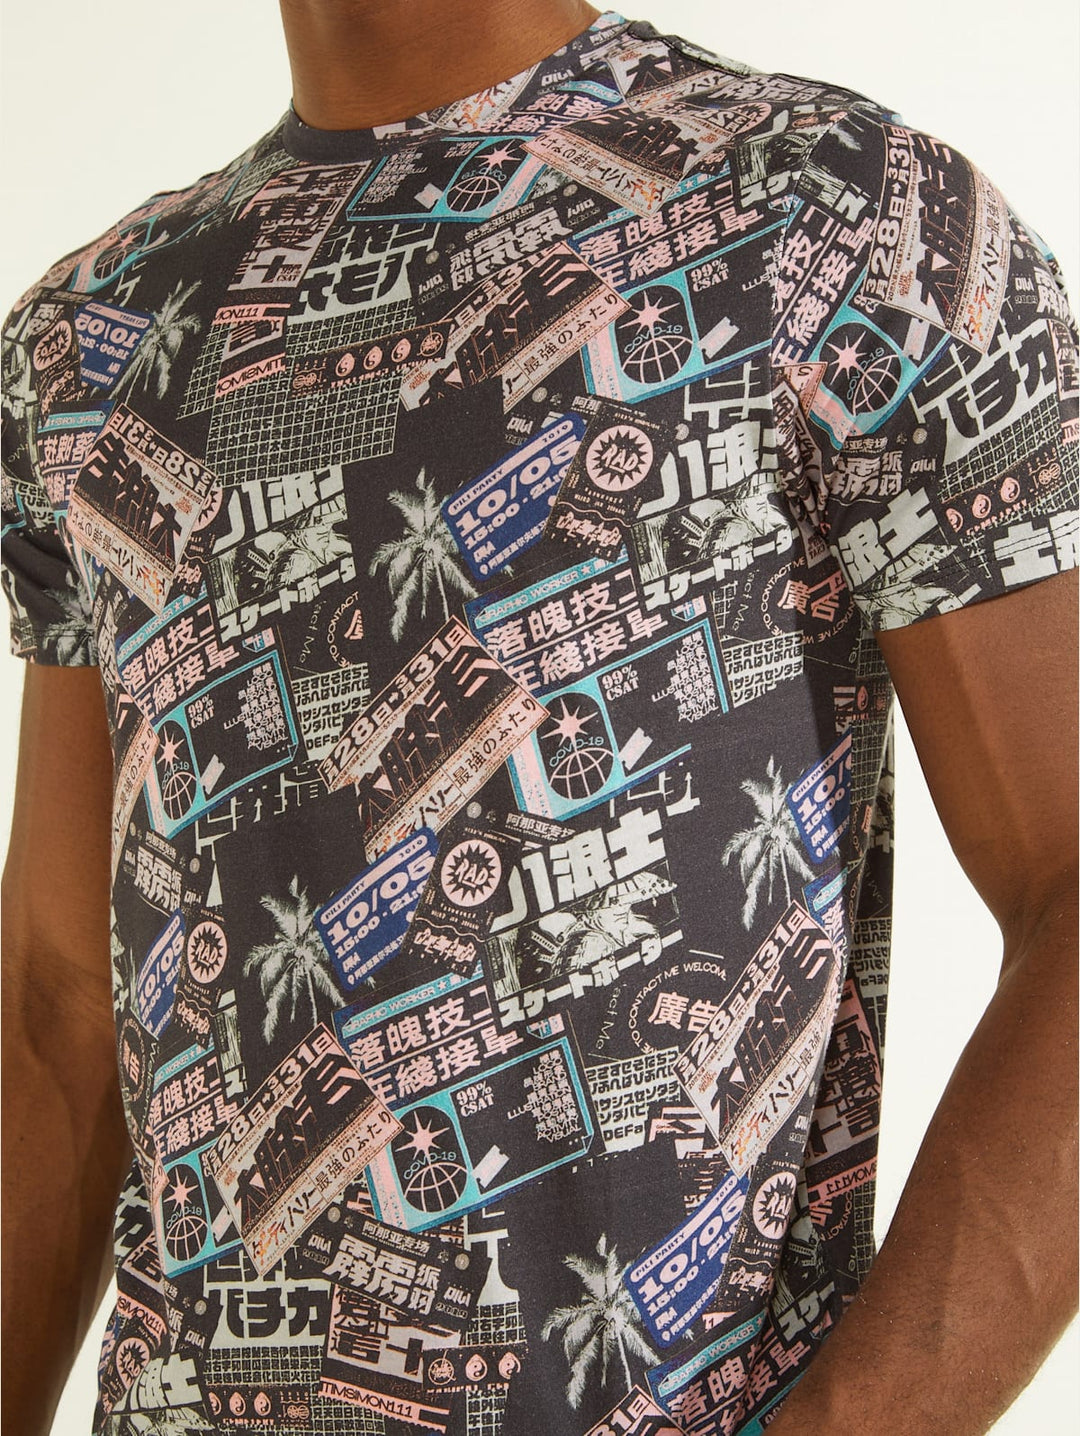 SS BSC STICKER COLLAGE TEE - Guess